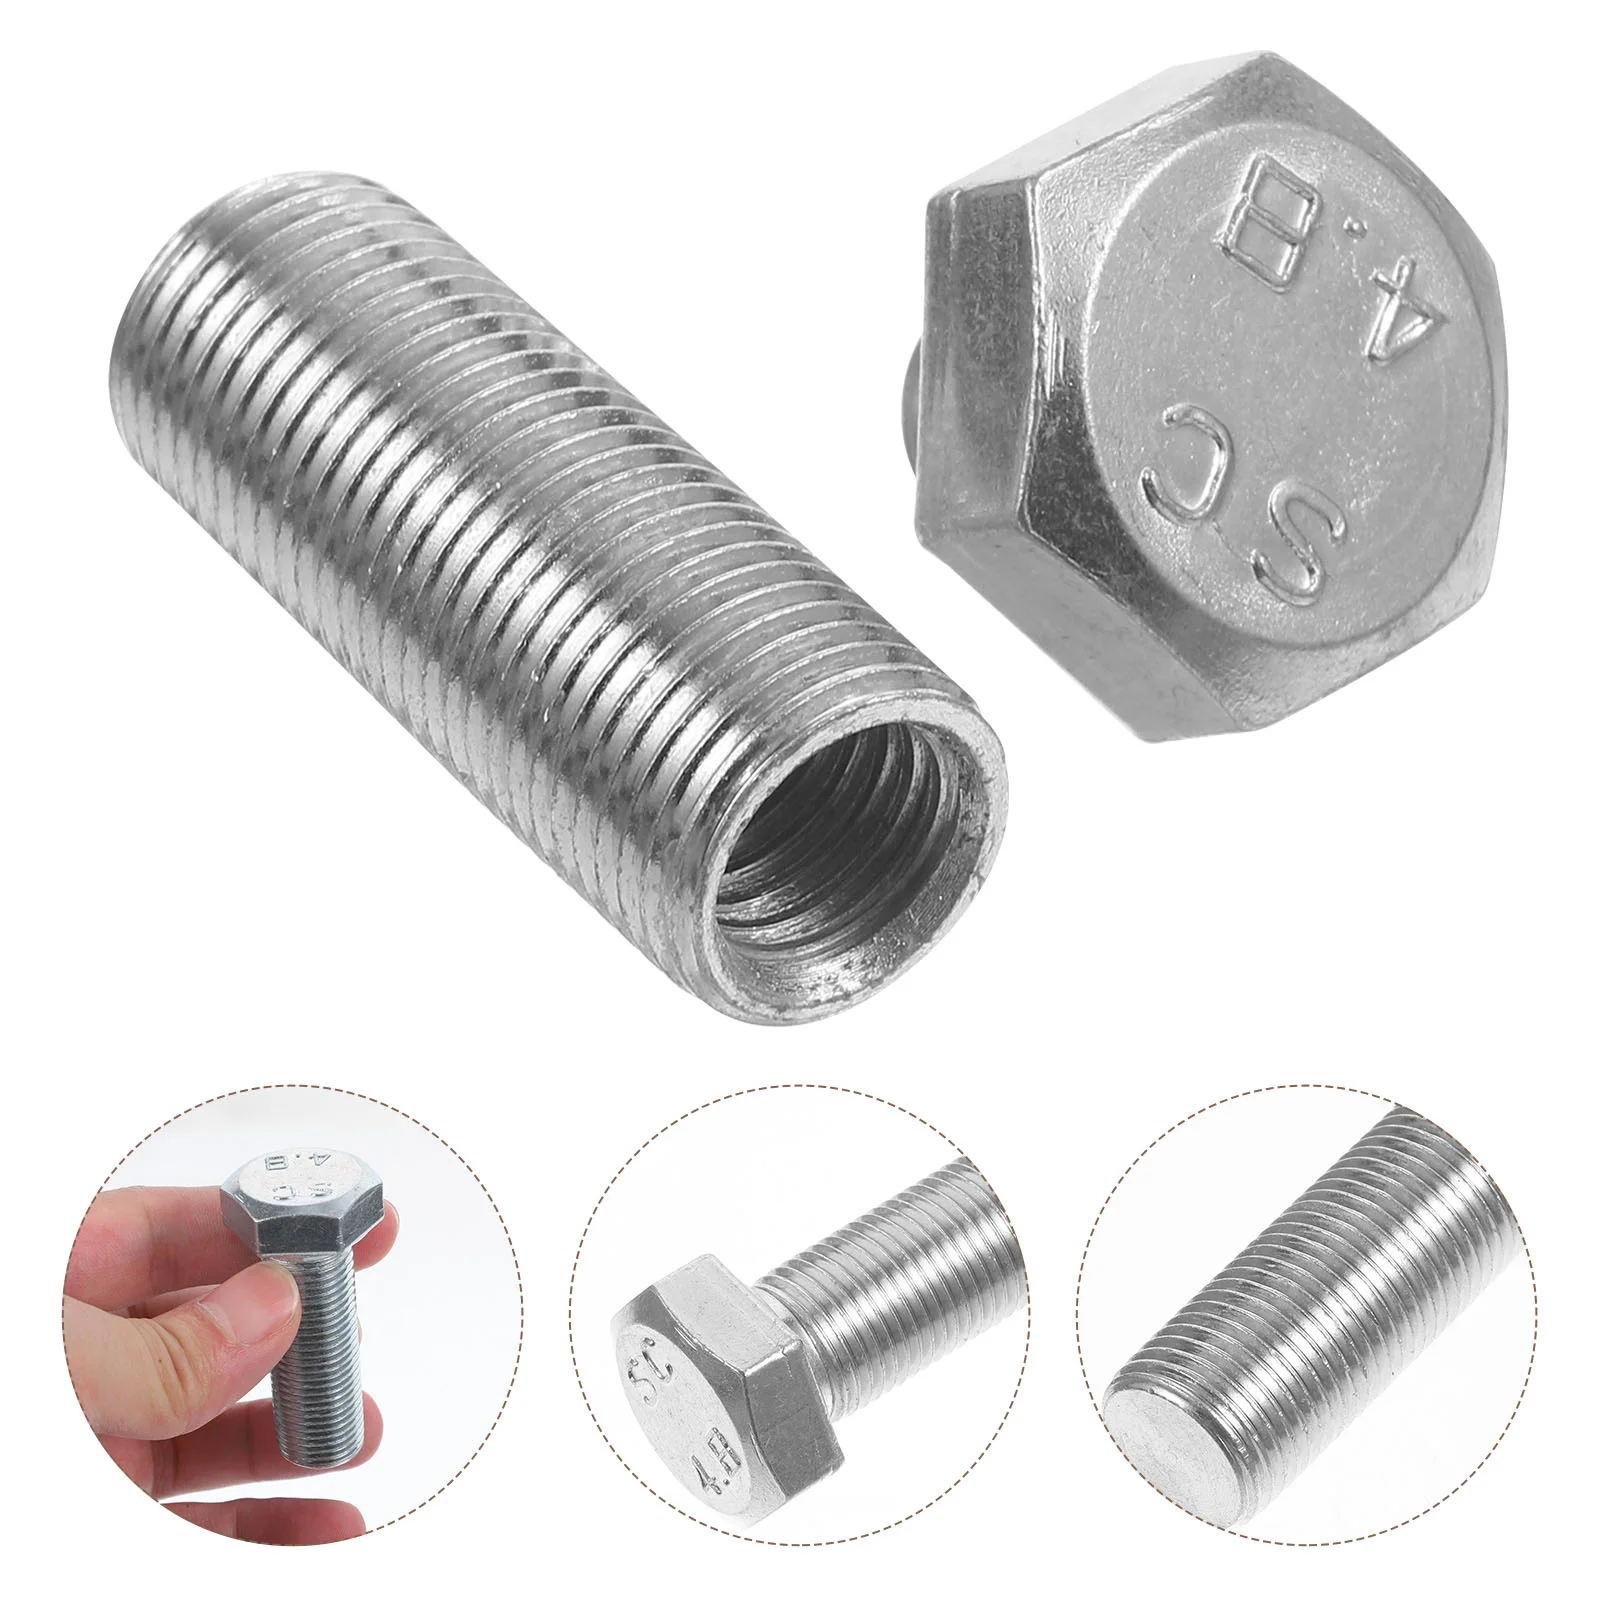 

Metal Hiding Container Camping Accessory Screw Shaped Bolt Trinkets Storage Containers Case for